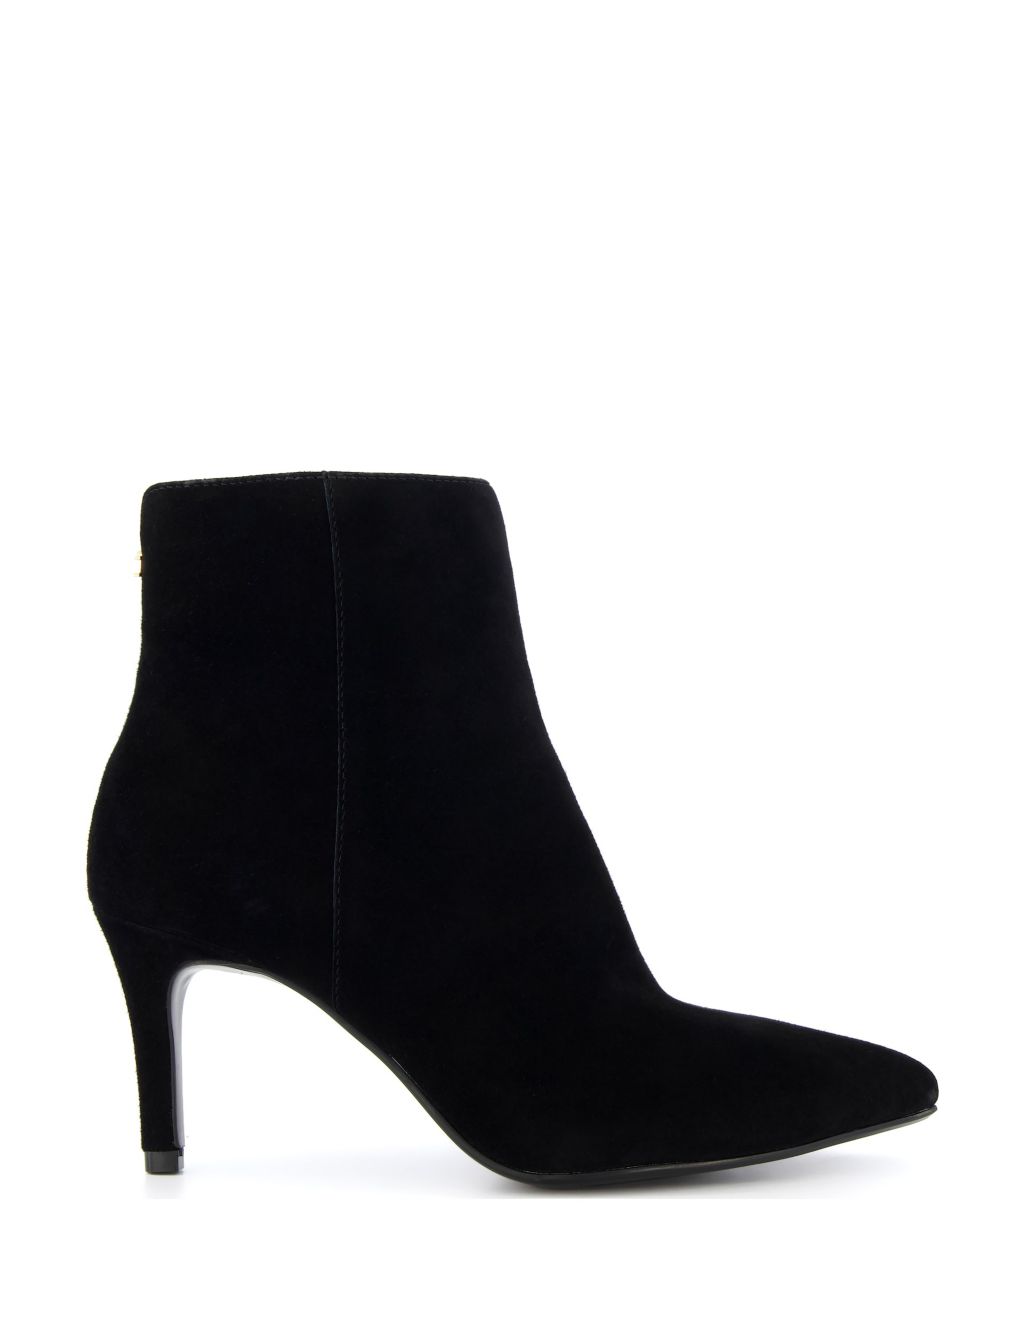 Suede Stiletto Heel Pointed Ankle Boots image 1